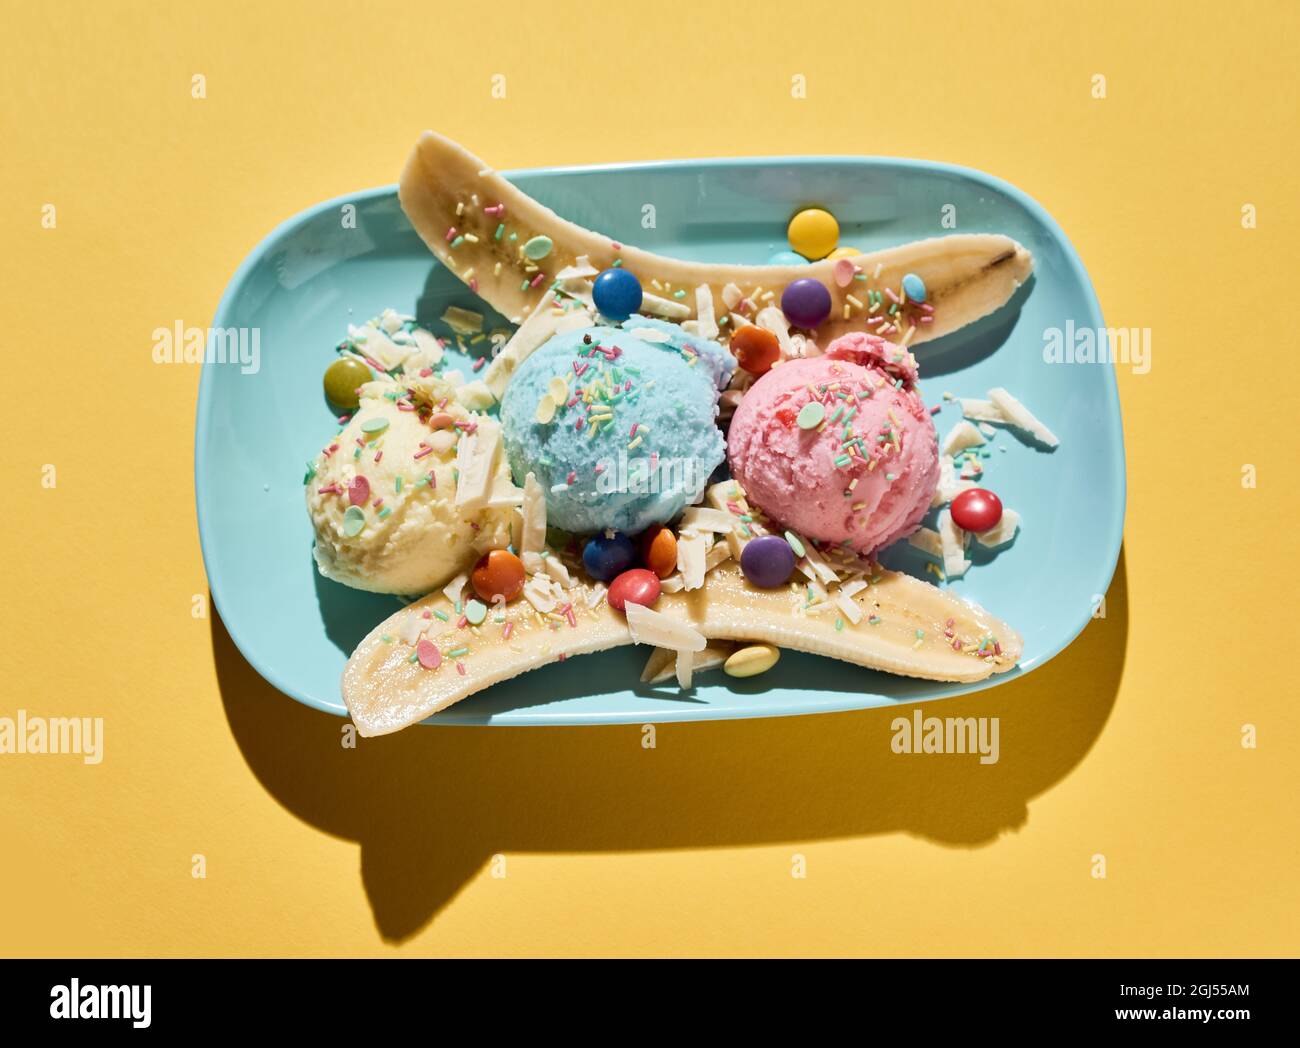 Top view of delicious banana split dessert with colorful ice cream scoops decorated with dragee and sprinkles served on blue plate on yellow backgroun Stock Photo